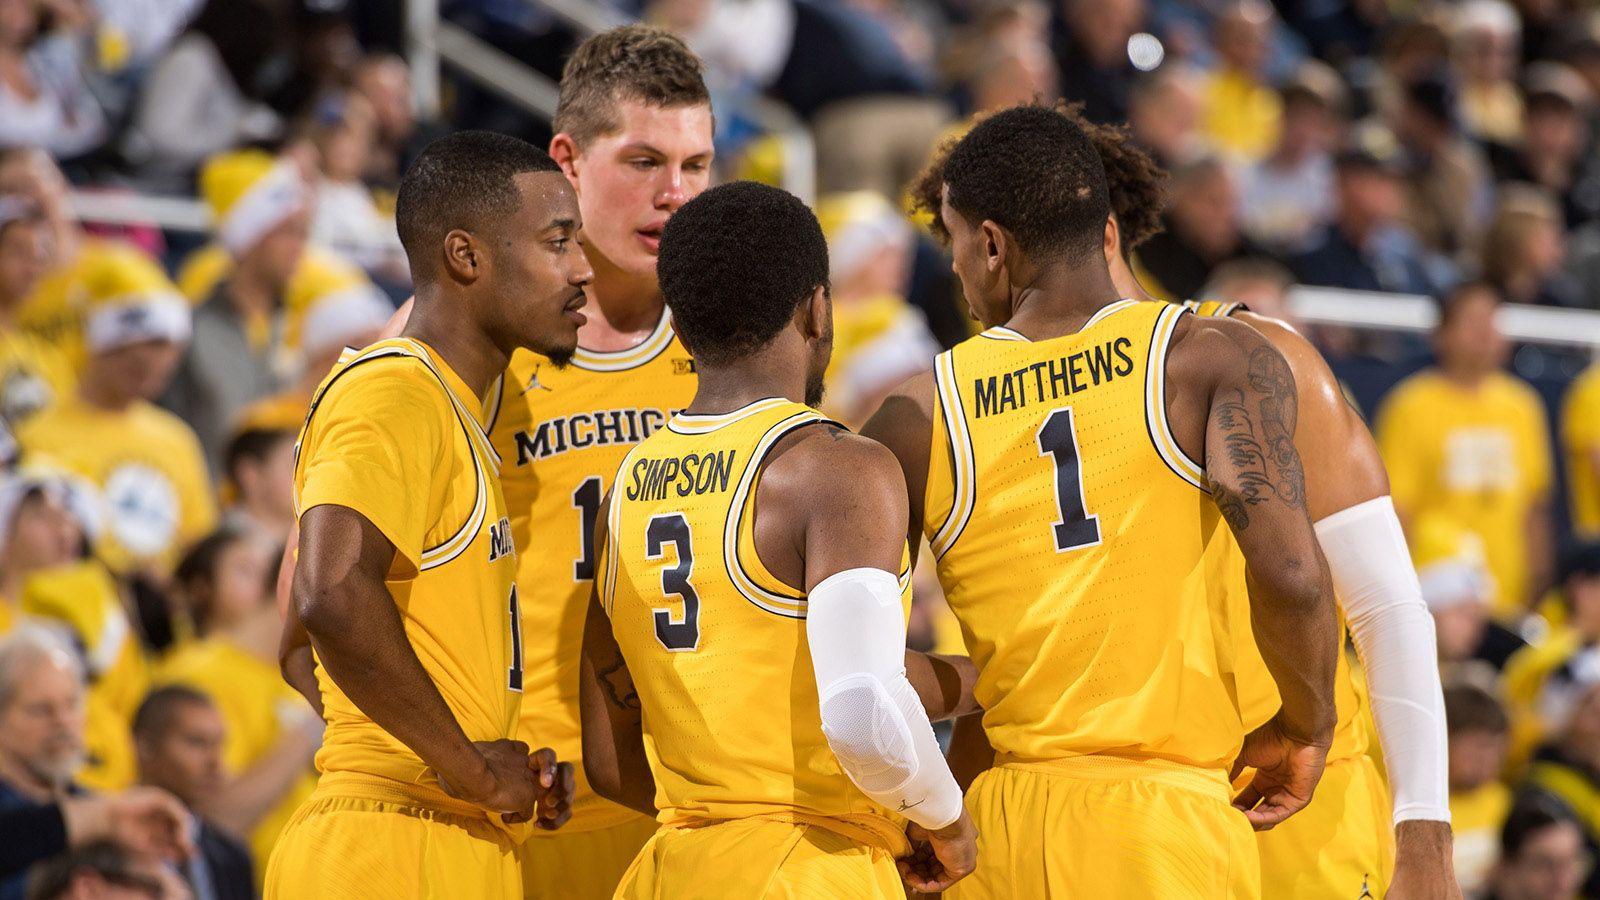 Wolverines to Face No. 9 Seed Florida State for Spot in NCAA Final